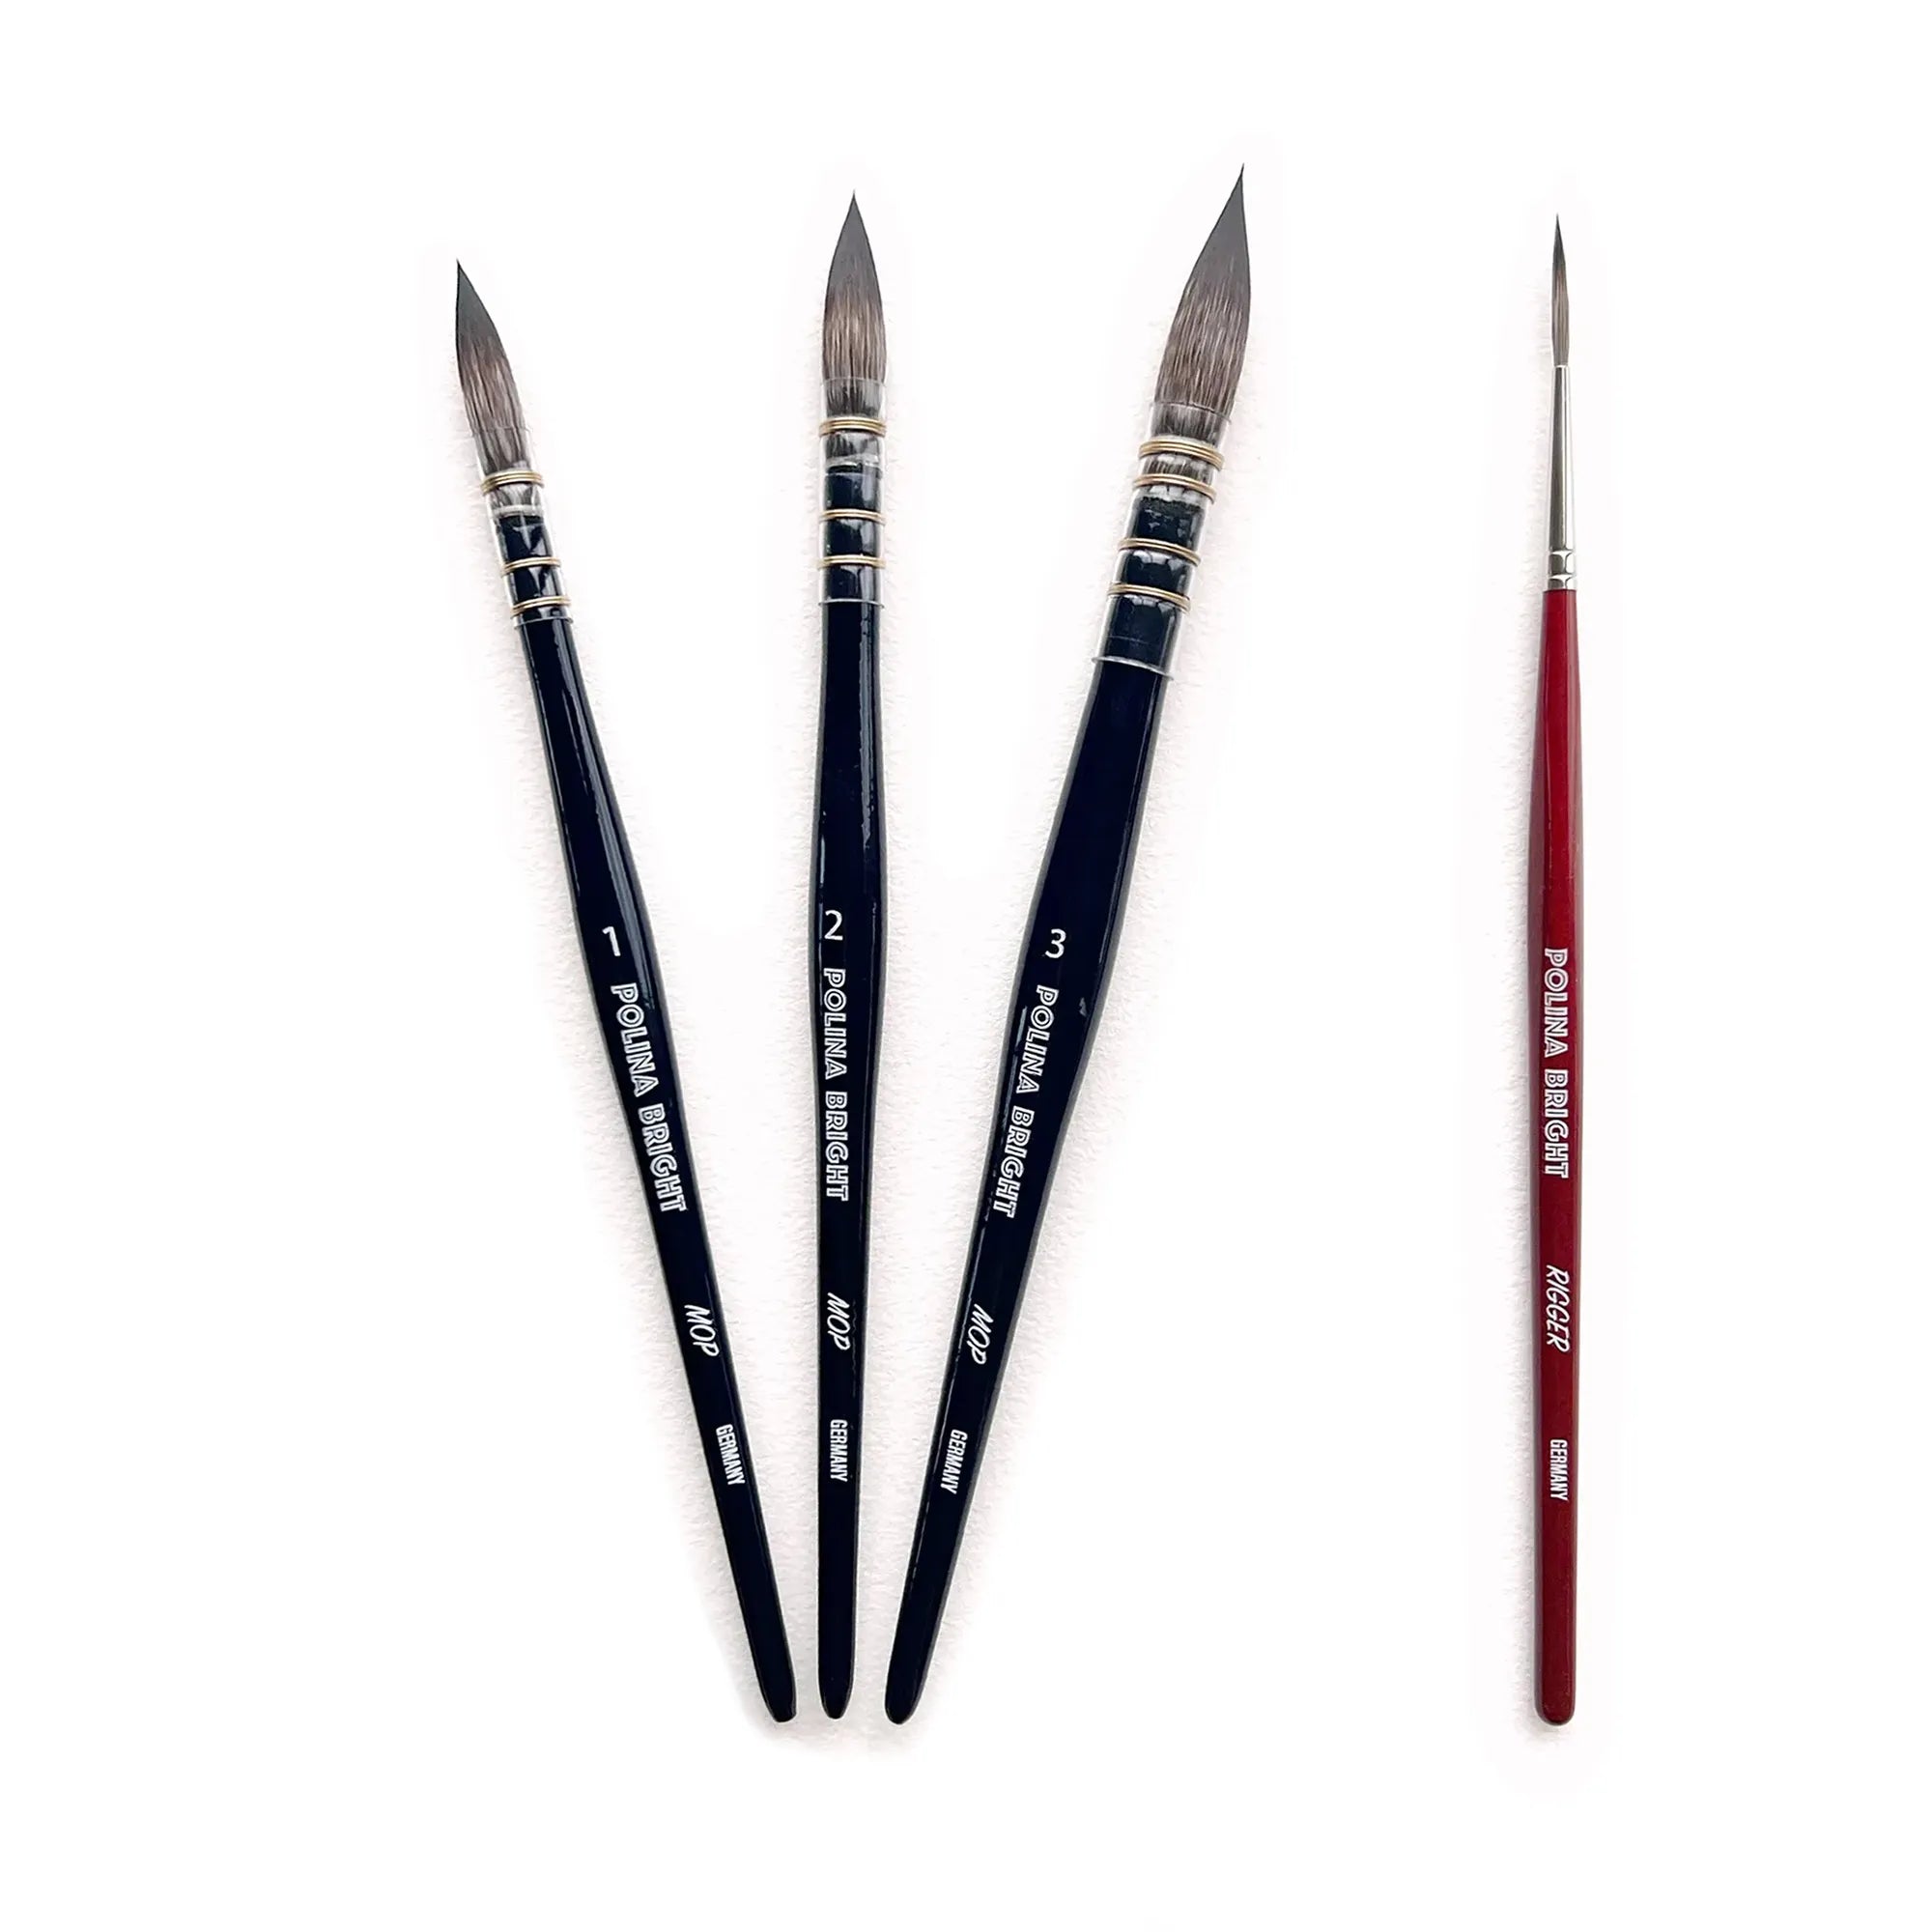 Professional watercolor Mop brush - Set of 3 with Rigger - Cruelty free & Vegan by Polina Bright